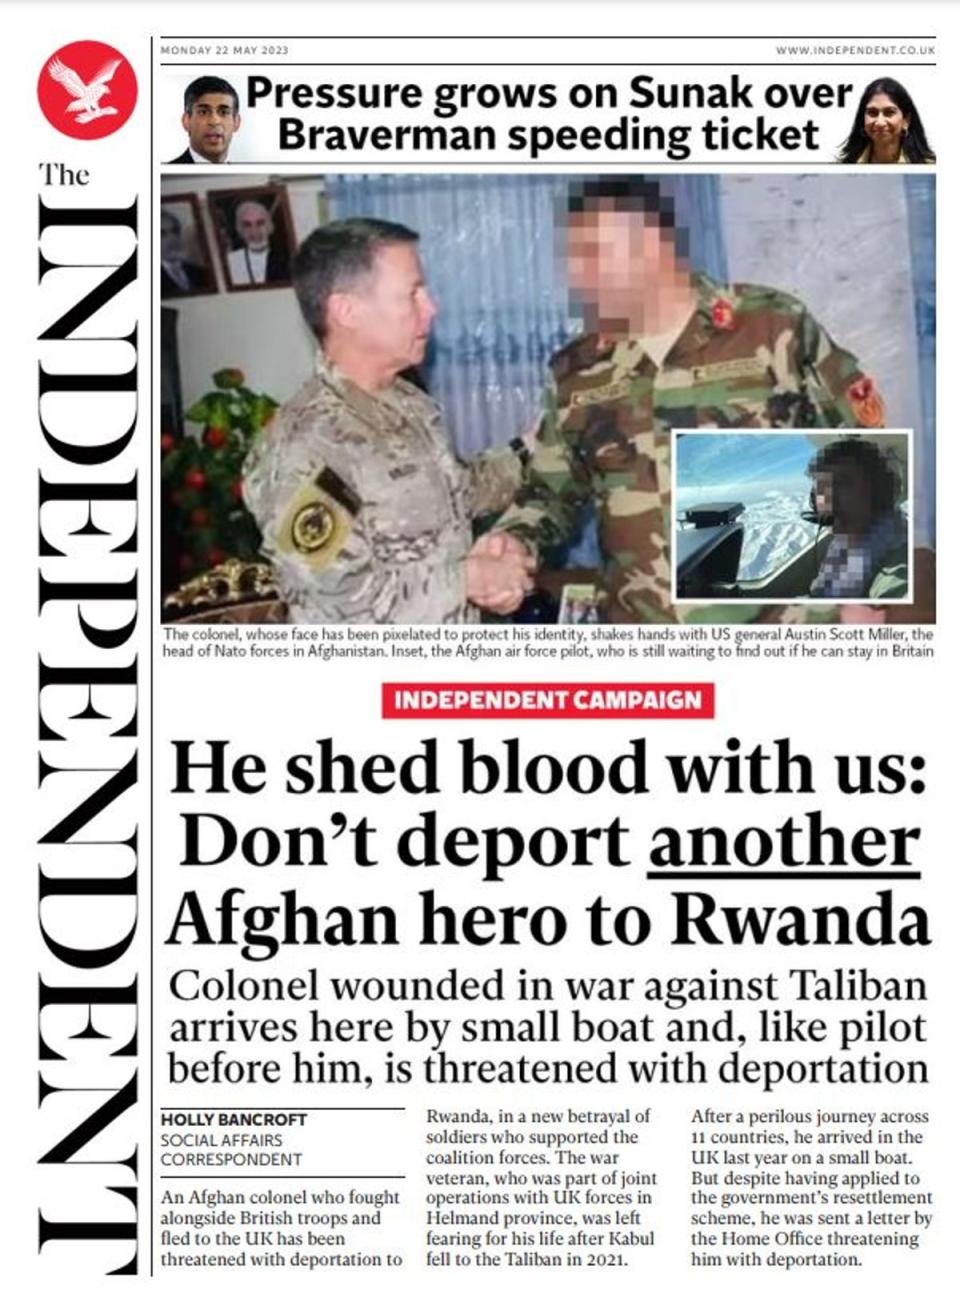 The Independent has reported on the plight of Aghan heroes threatened with deportation to Rwanda (.)